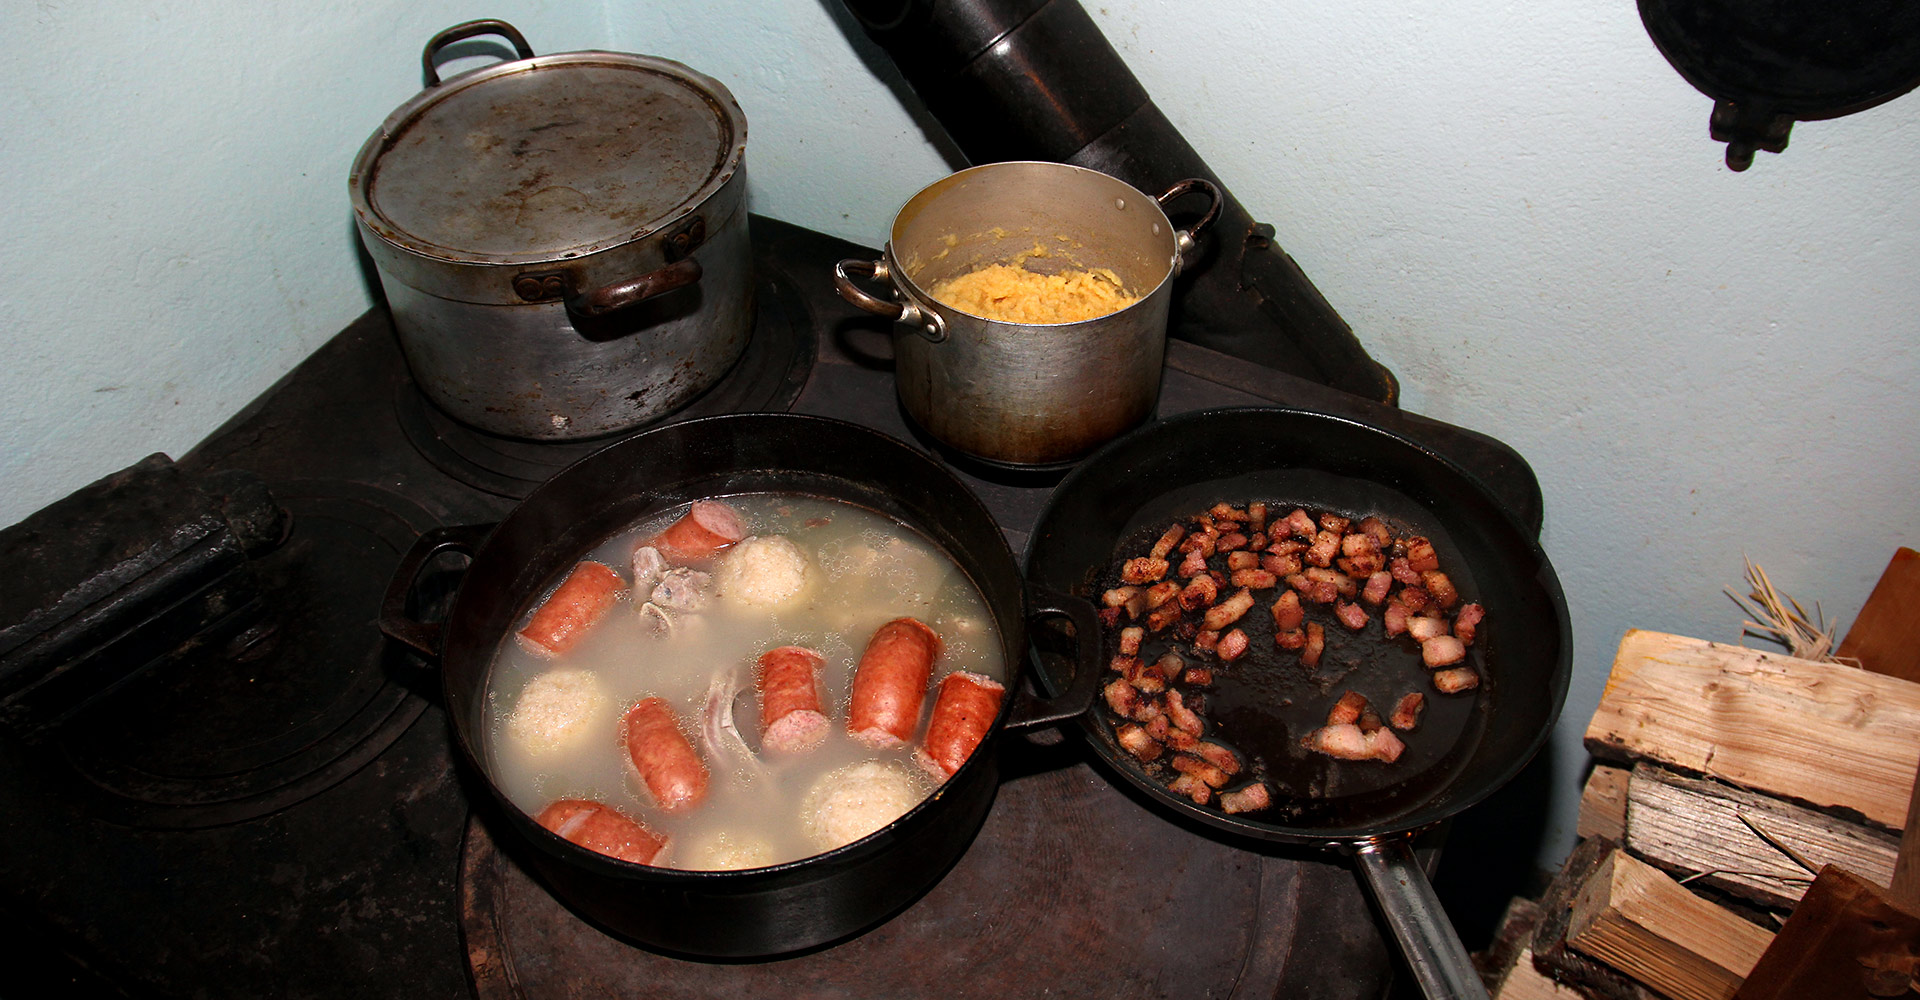 Cooking salted meat, raspeball, sausage, sweed mash on an old wooden stove.